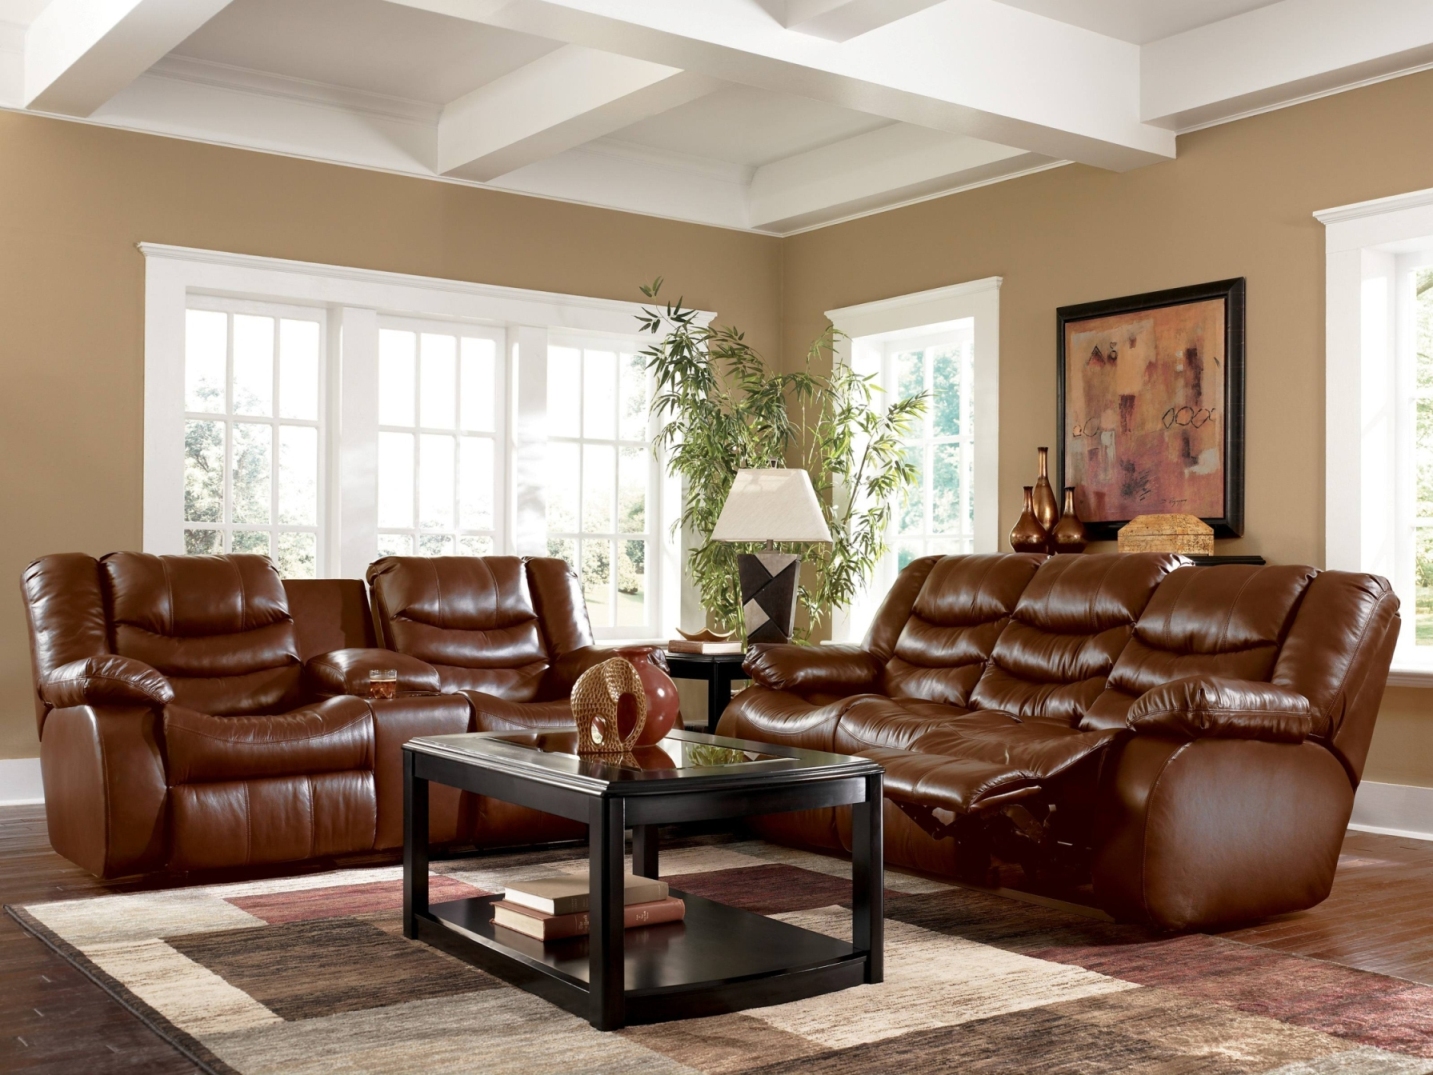 painting ideas living room brown furniture